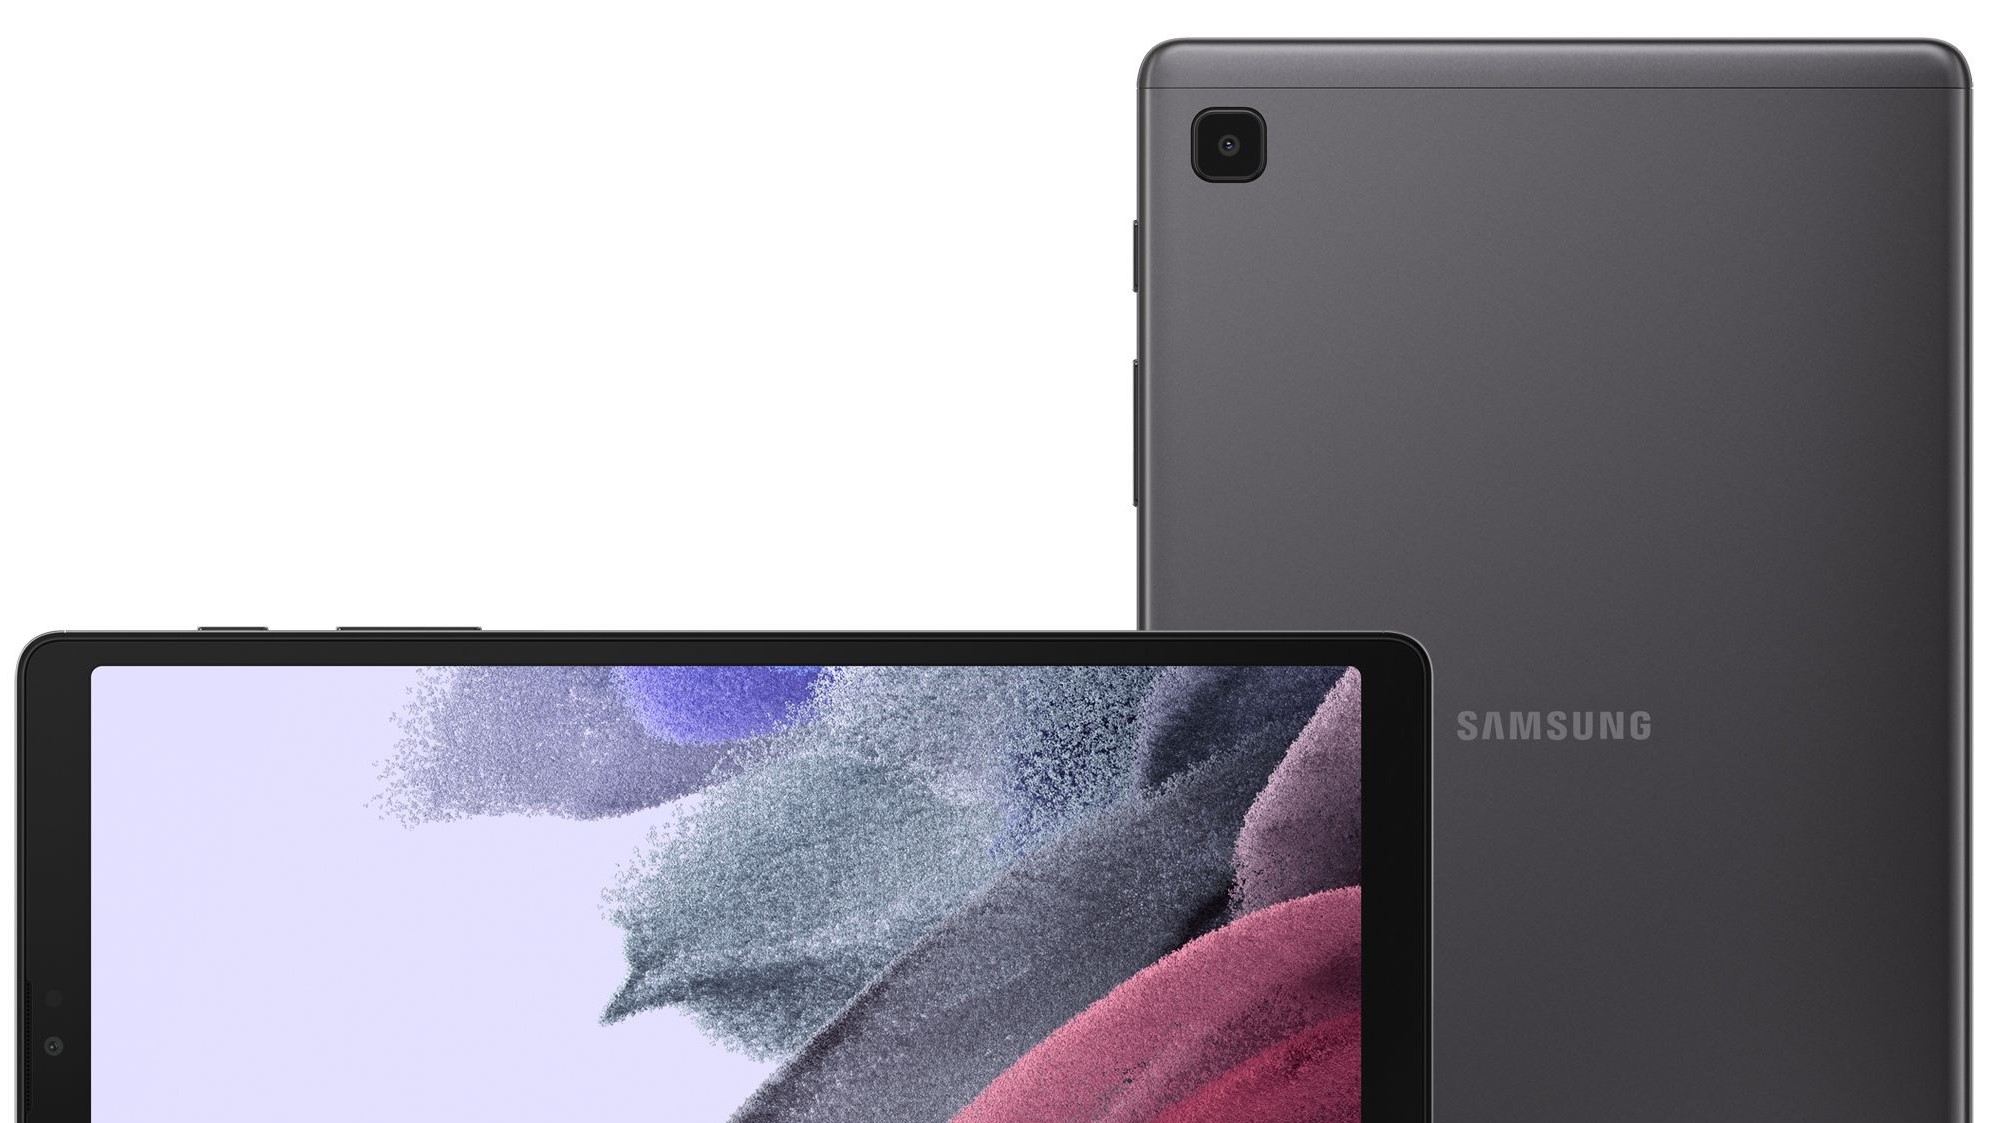 Samsung Galaxy Tab A7 Lite specs and render surface – Droid News